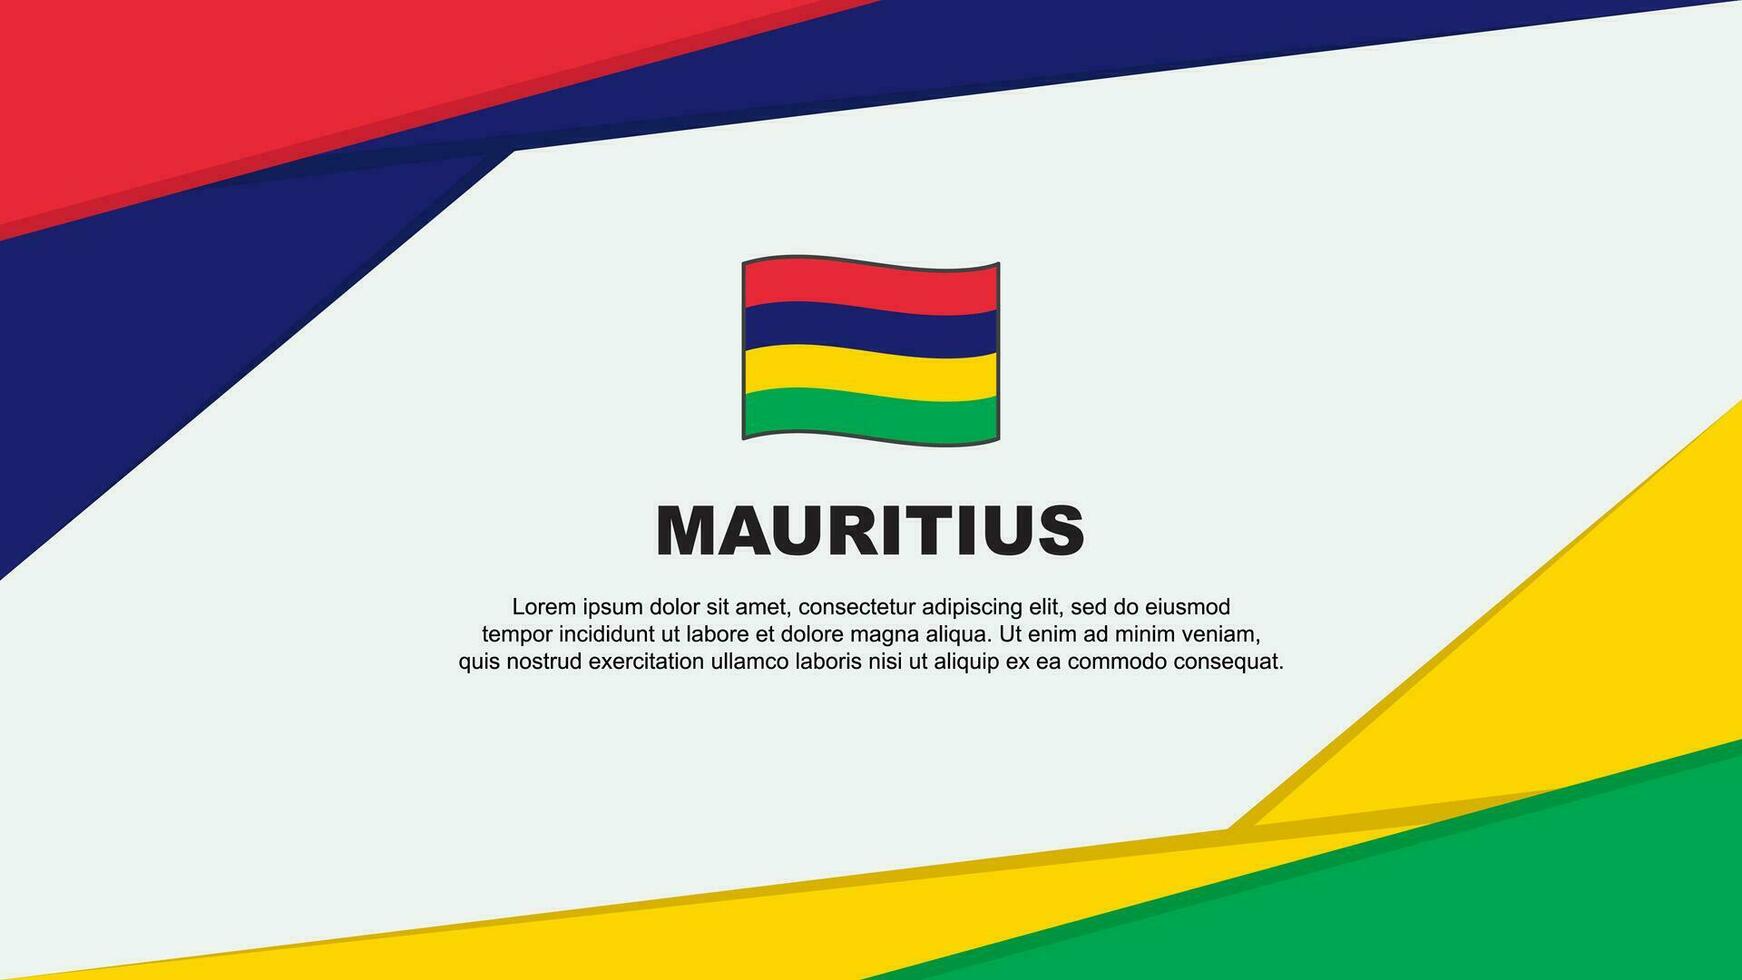 Mauritius Flag Abstract Background Design Template. Mauritius Independence Day Banner Cartoon Vector Illustration. Mauritius